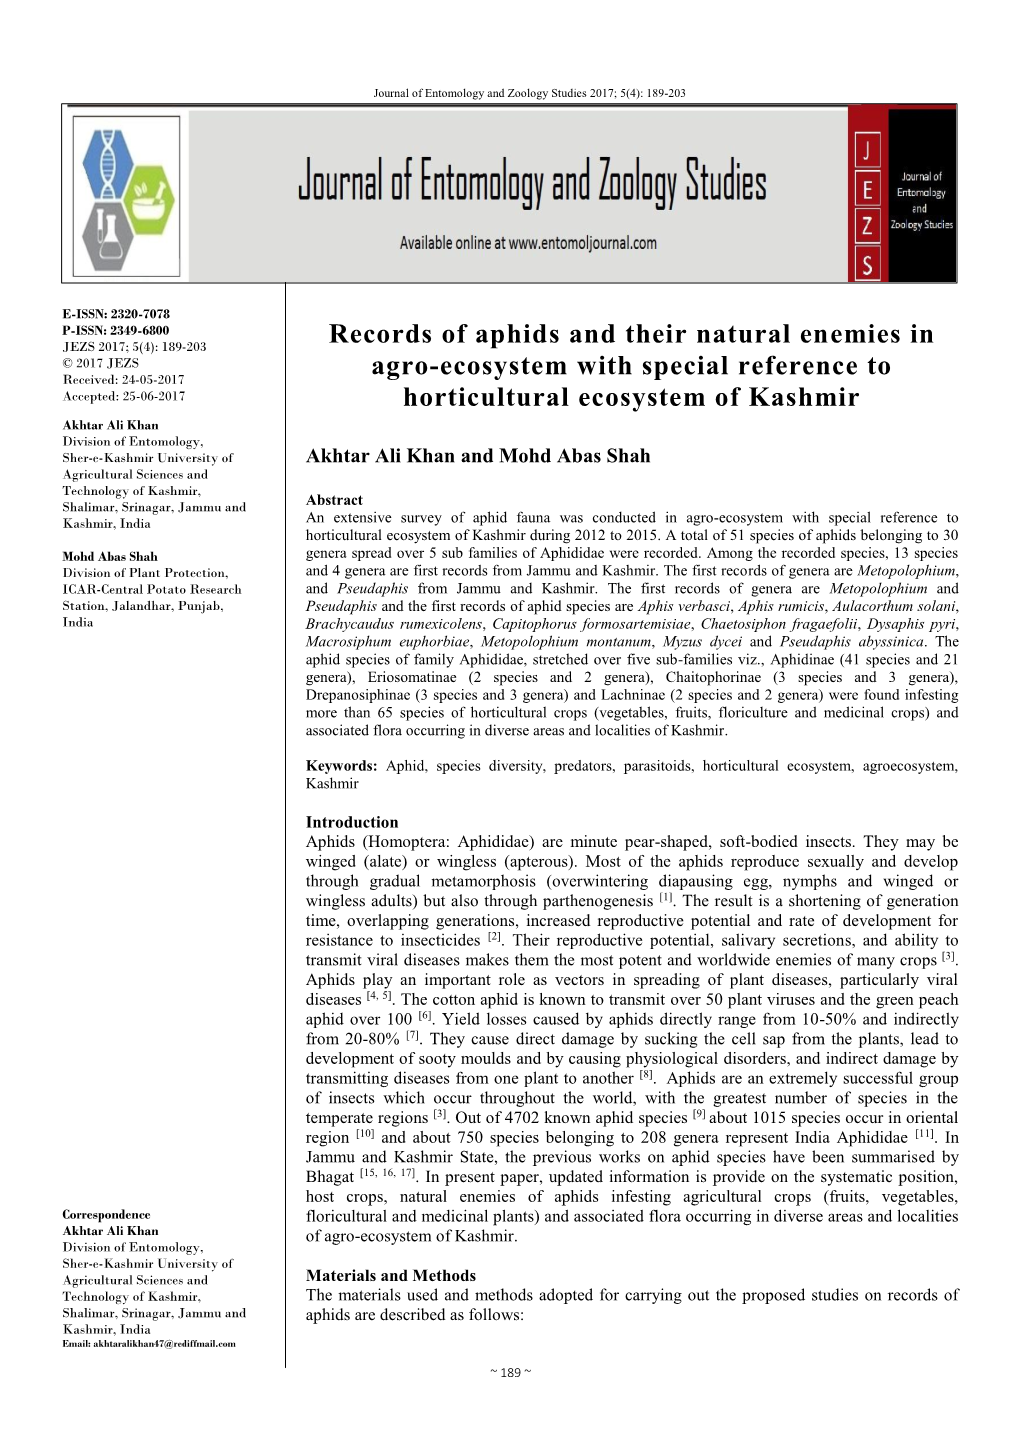 Records of Aphids and Their Natural Enemies in Agro-Ecosystem With